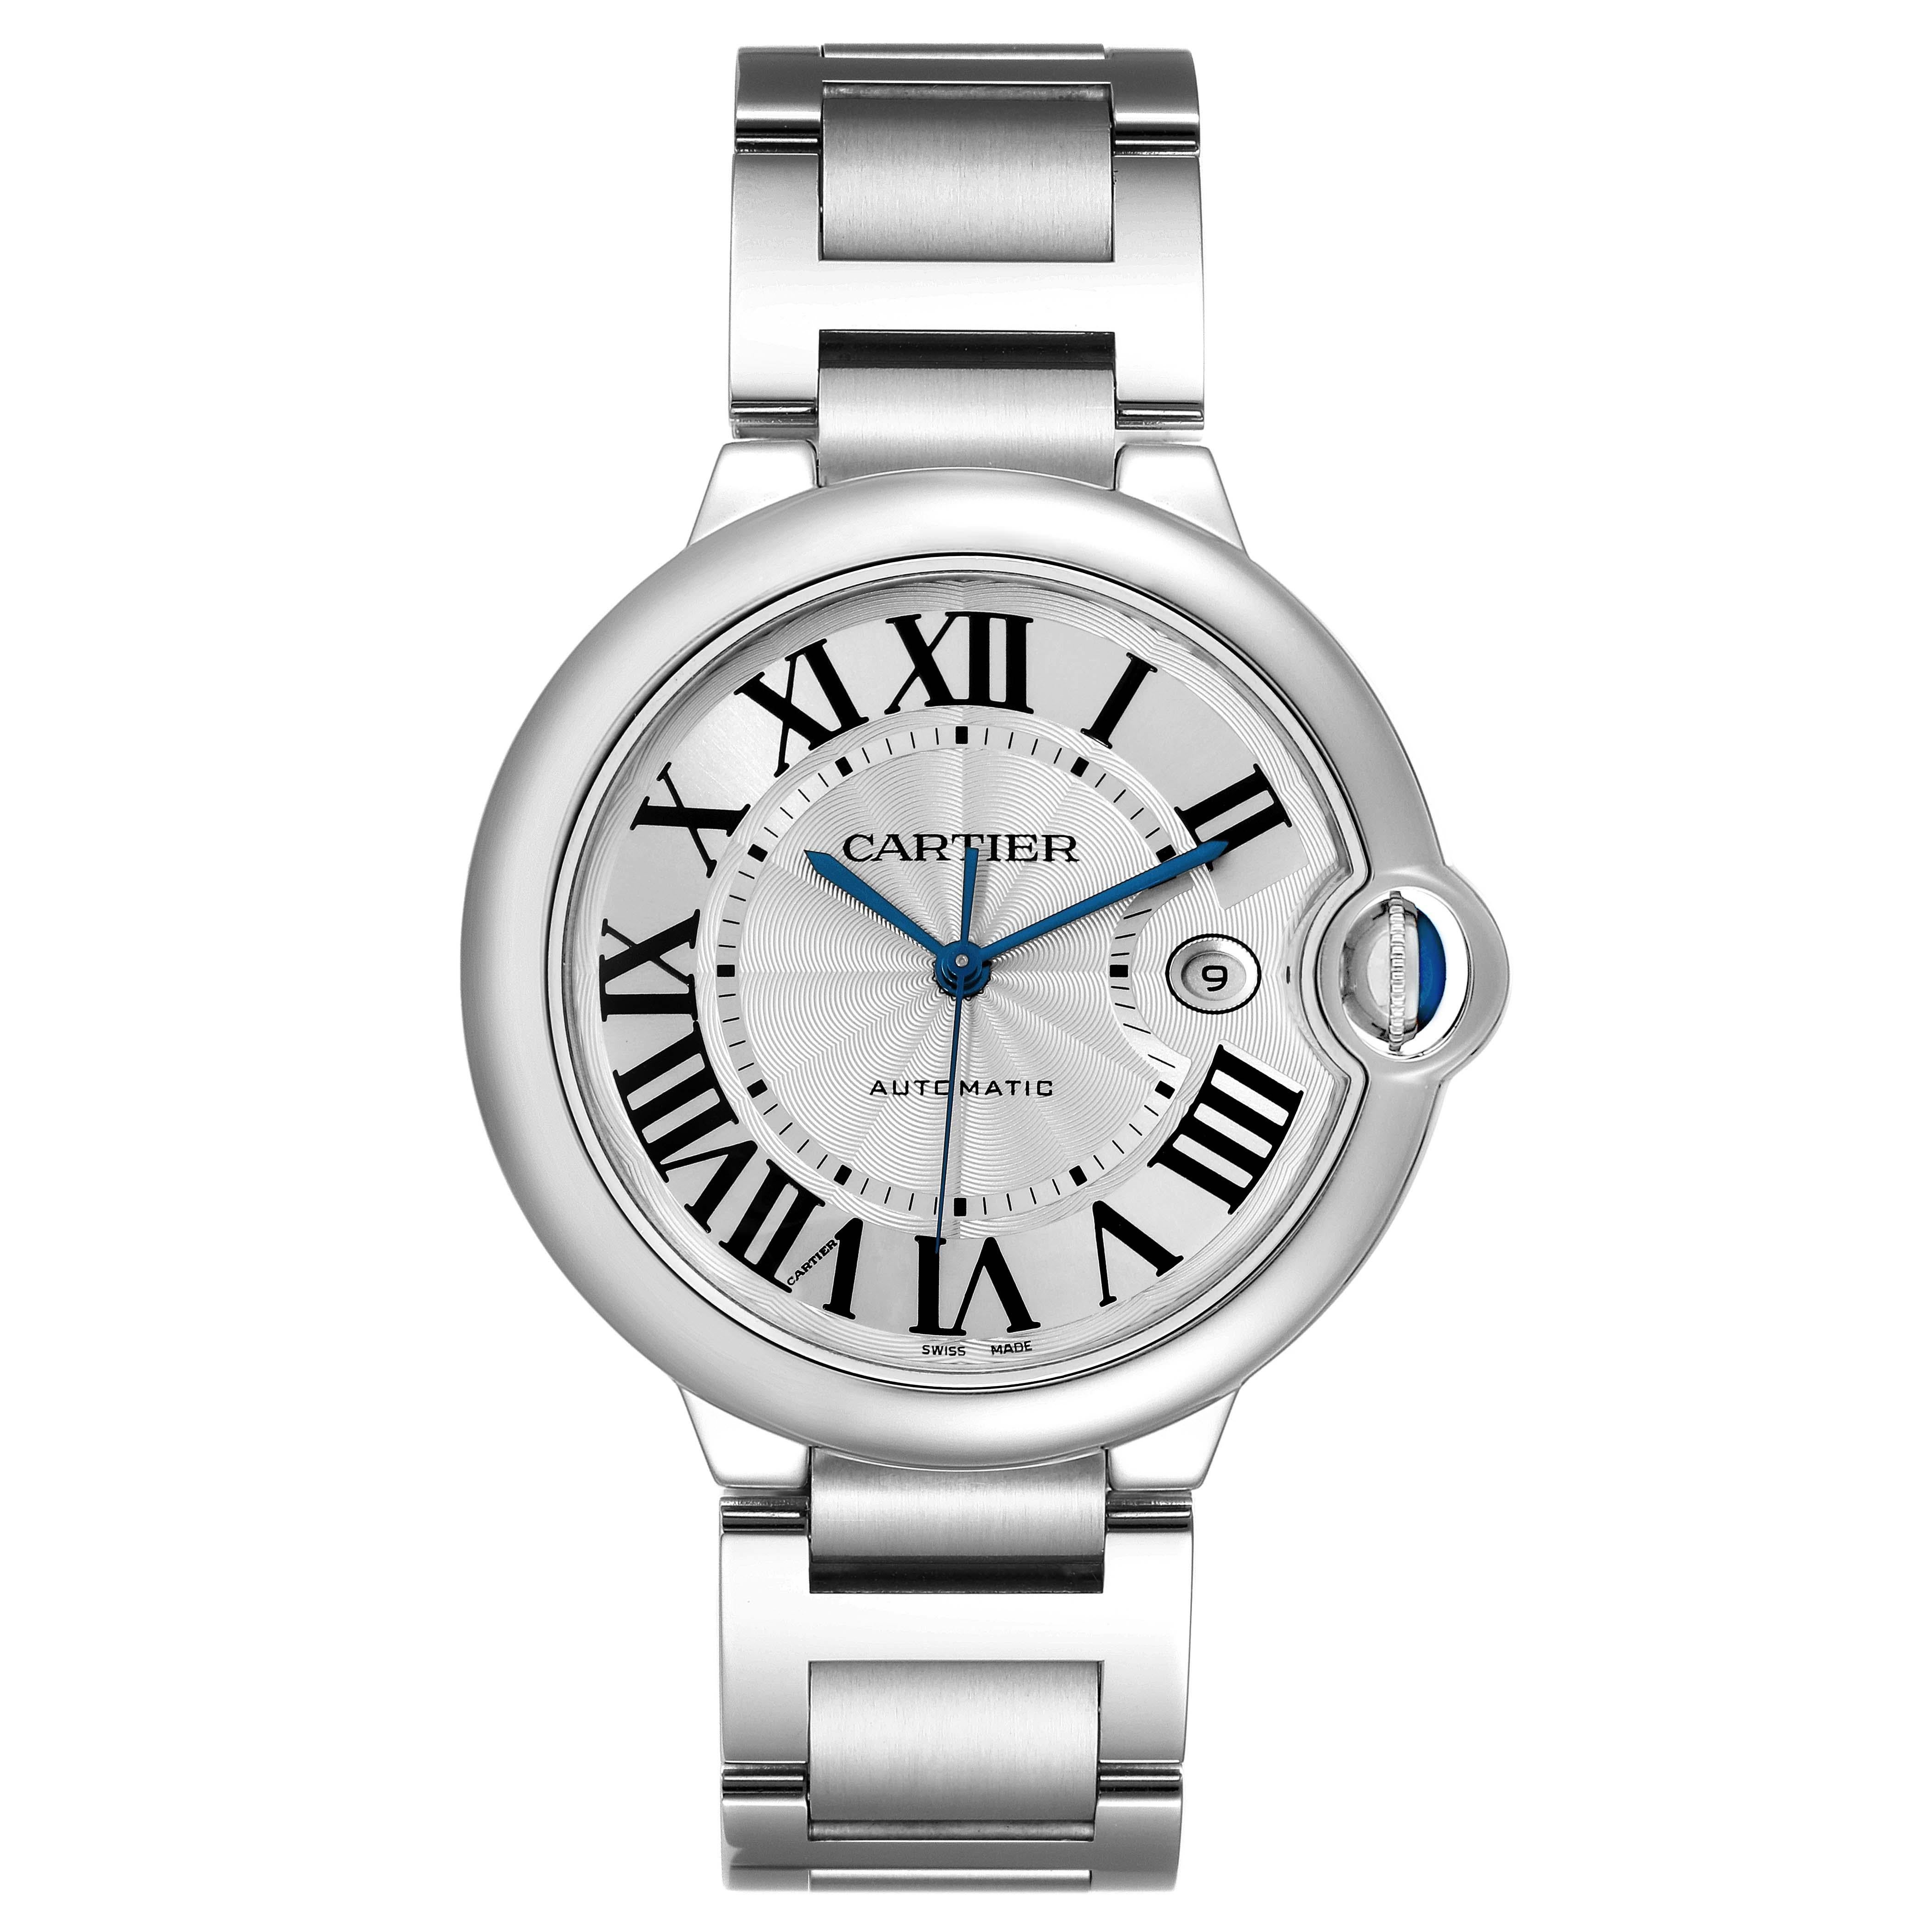 Cartier Ballon Bleu 42 Automatic Silver Dial Steel Mens Watch W69012Z4 Box Paper. Automatic self-winding movement. Round stainless steel case 42.0 mm in diameter, 13 mm thick. Fluted crown set with the blue spinel cabochon. Smooth stainless steel